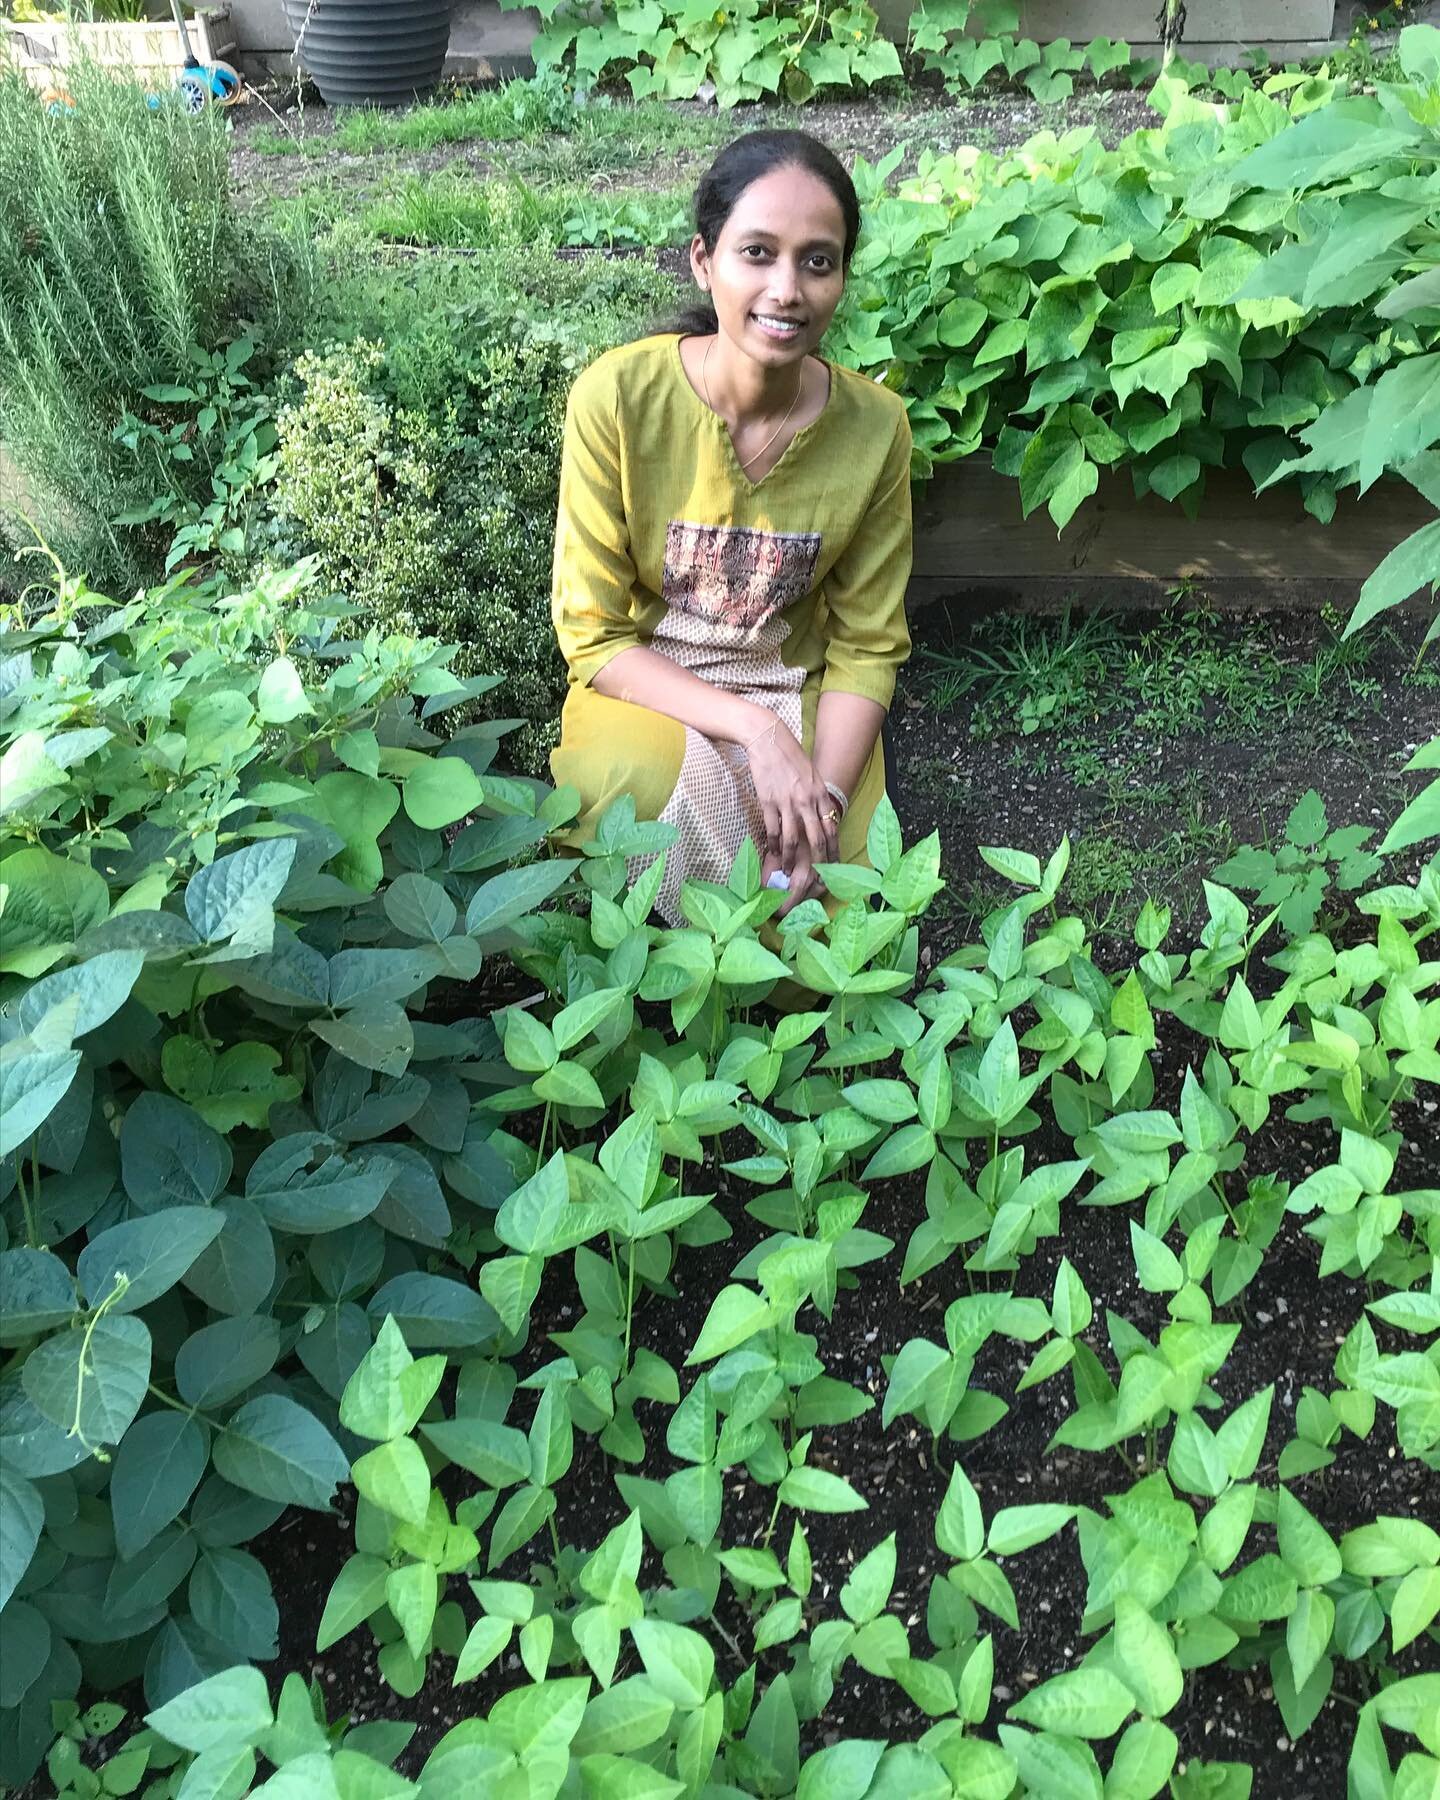 Anjani Sneha Varjala, a food studies graduate student at NYU, chose a mung bean variety for her seed story. She says: &ldquo;the @nyurbanfarmlab is the most amazing space I found. My joy of working with soil and bean projects was a bonus for it helpe